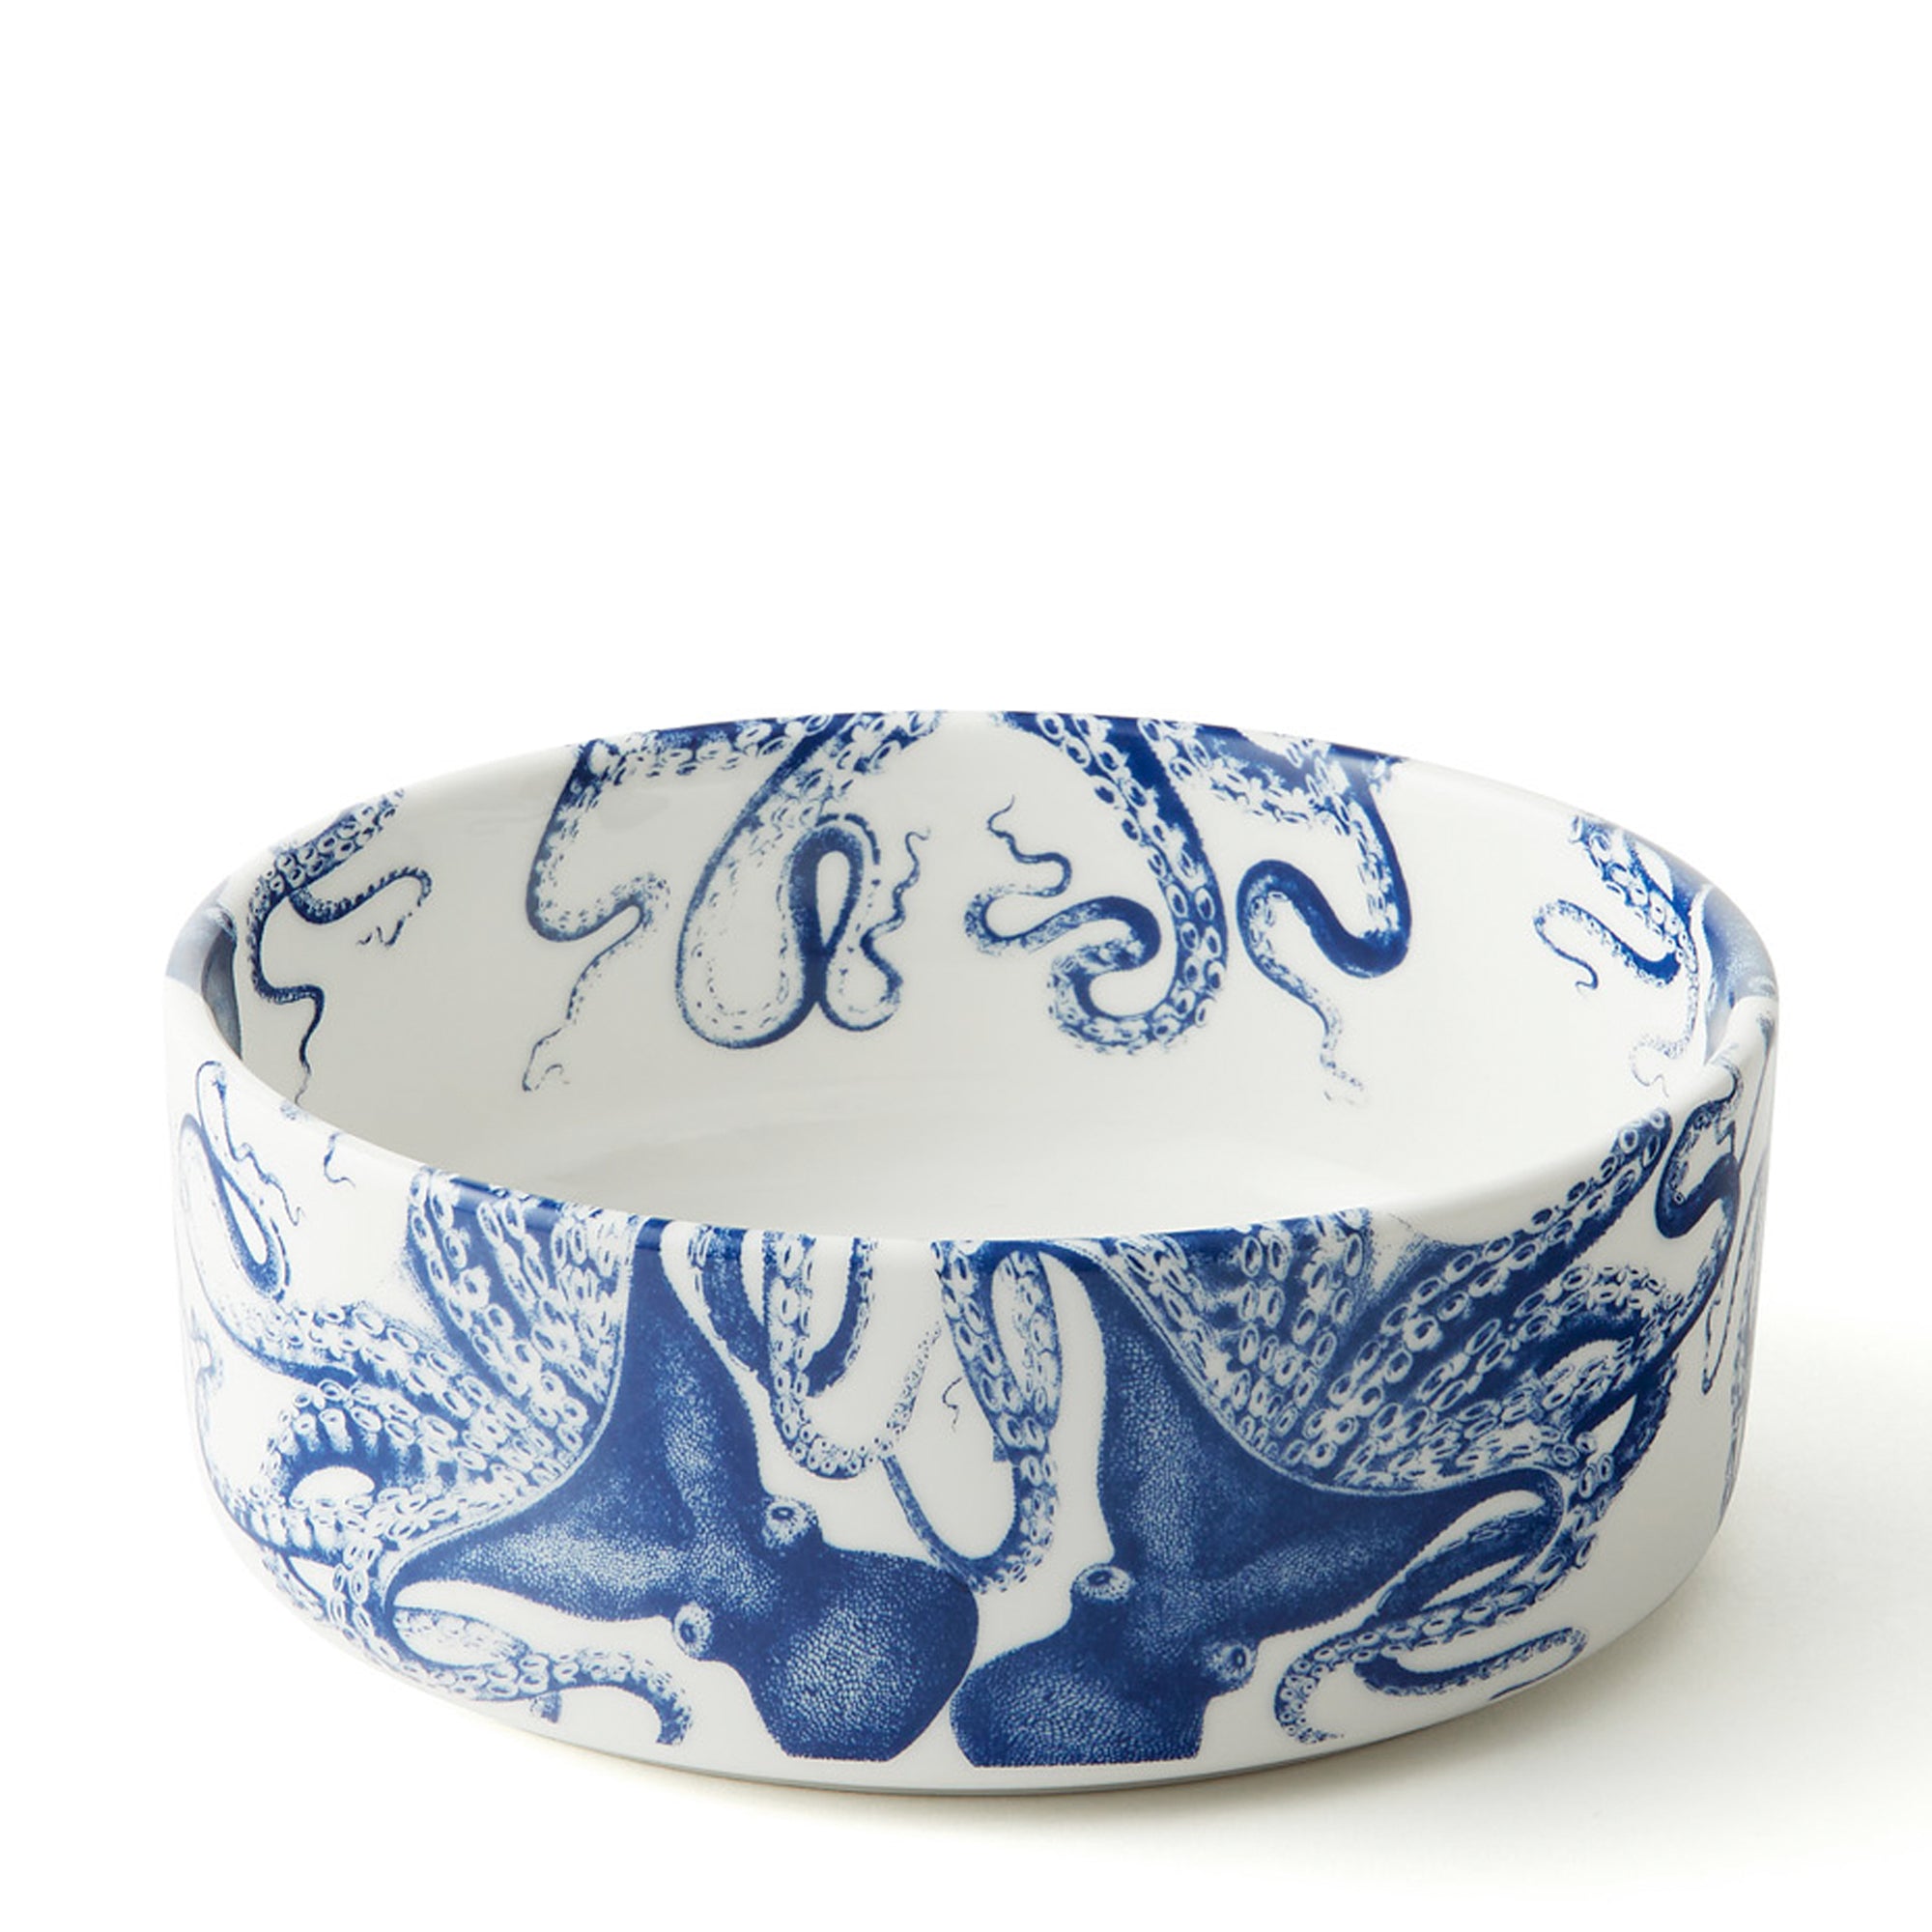 Lucy the Octopus Large Porcelain Pet bowl in Blue and White from Caskata